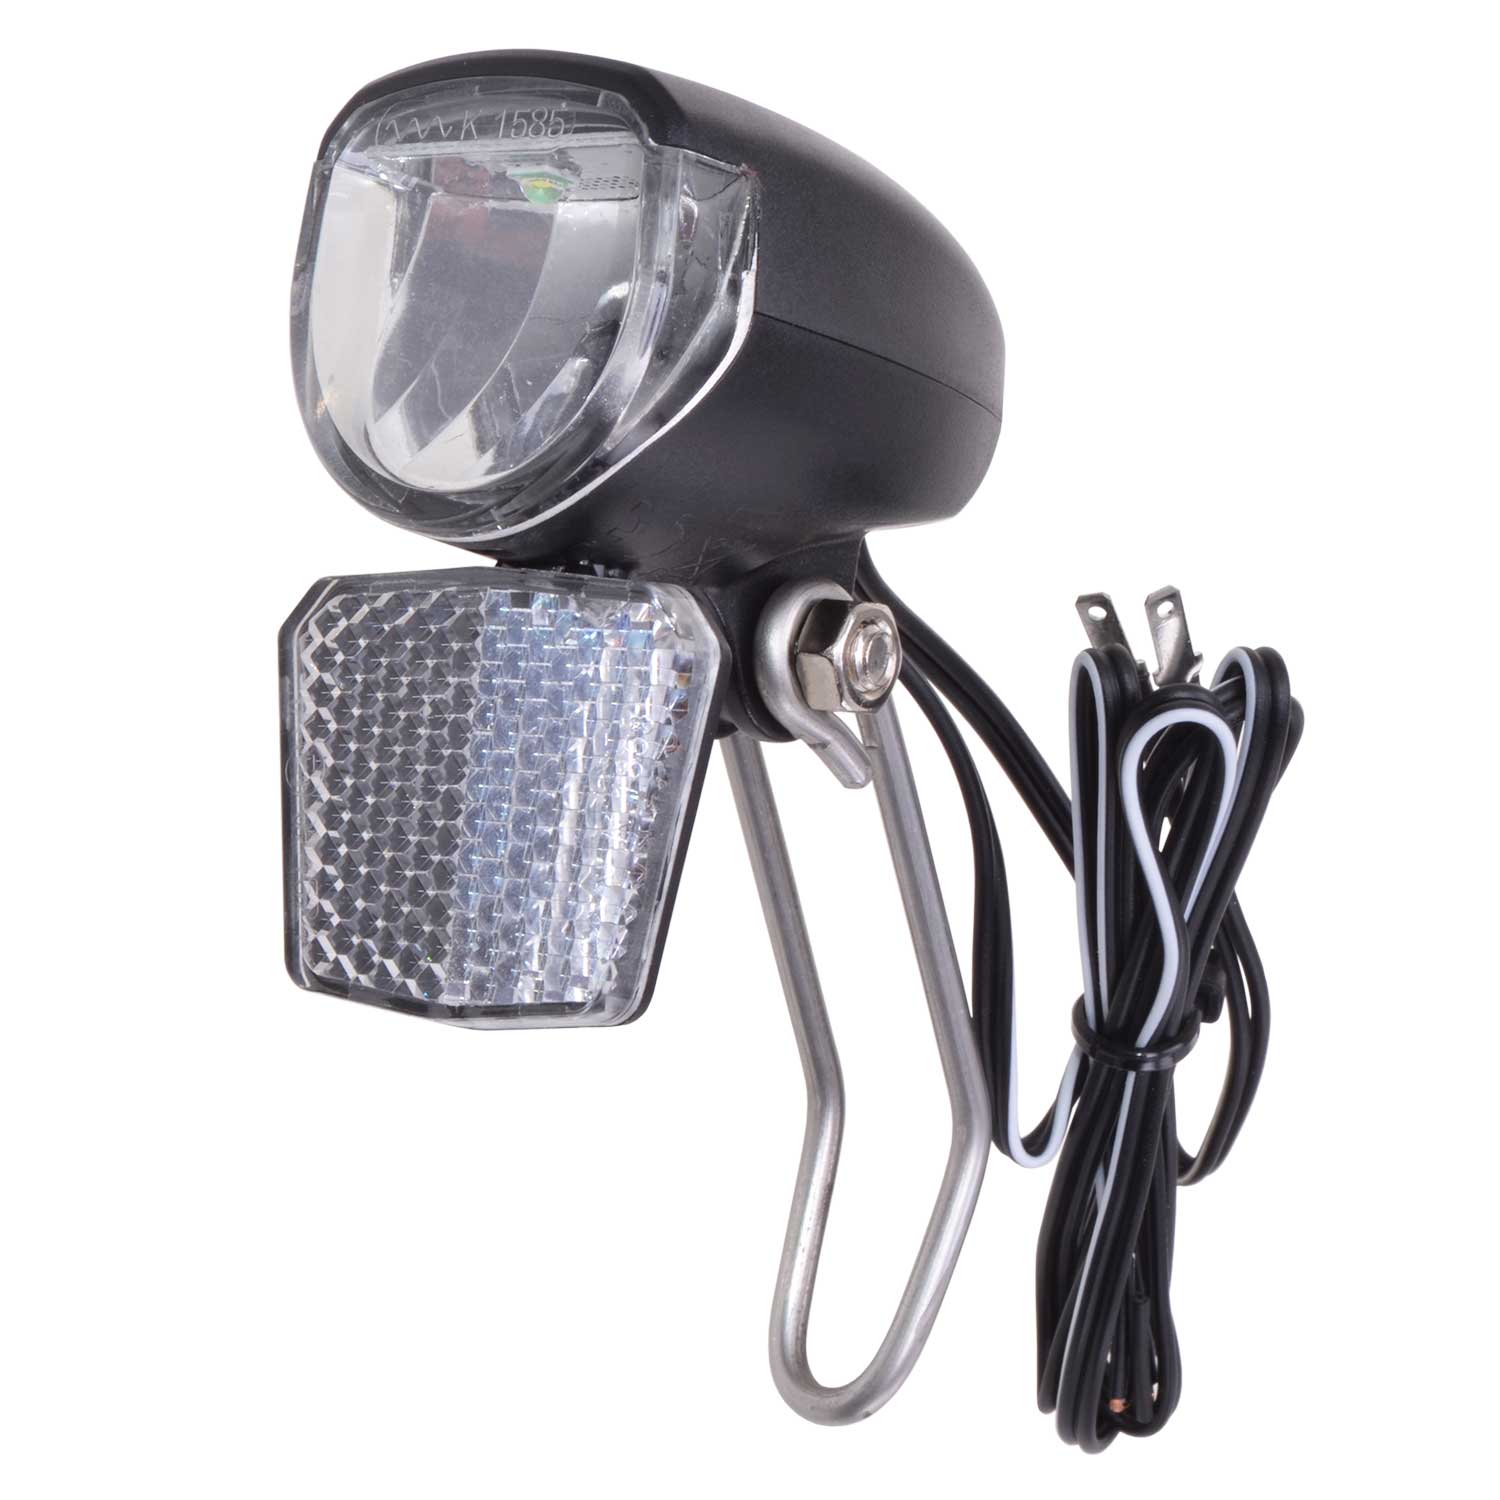 LED-Frontlicht 30 LUX